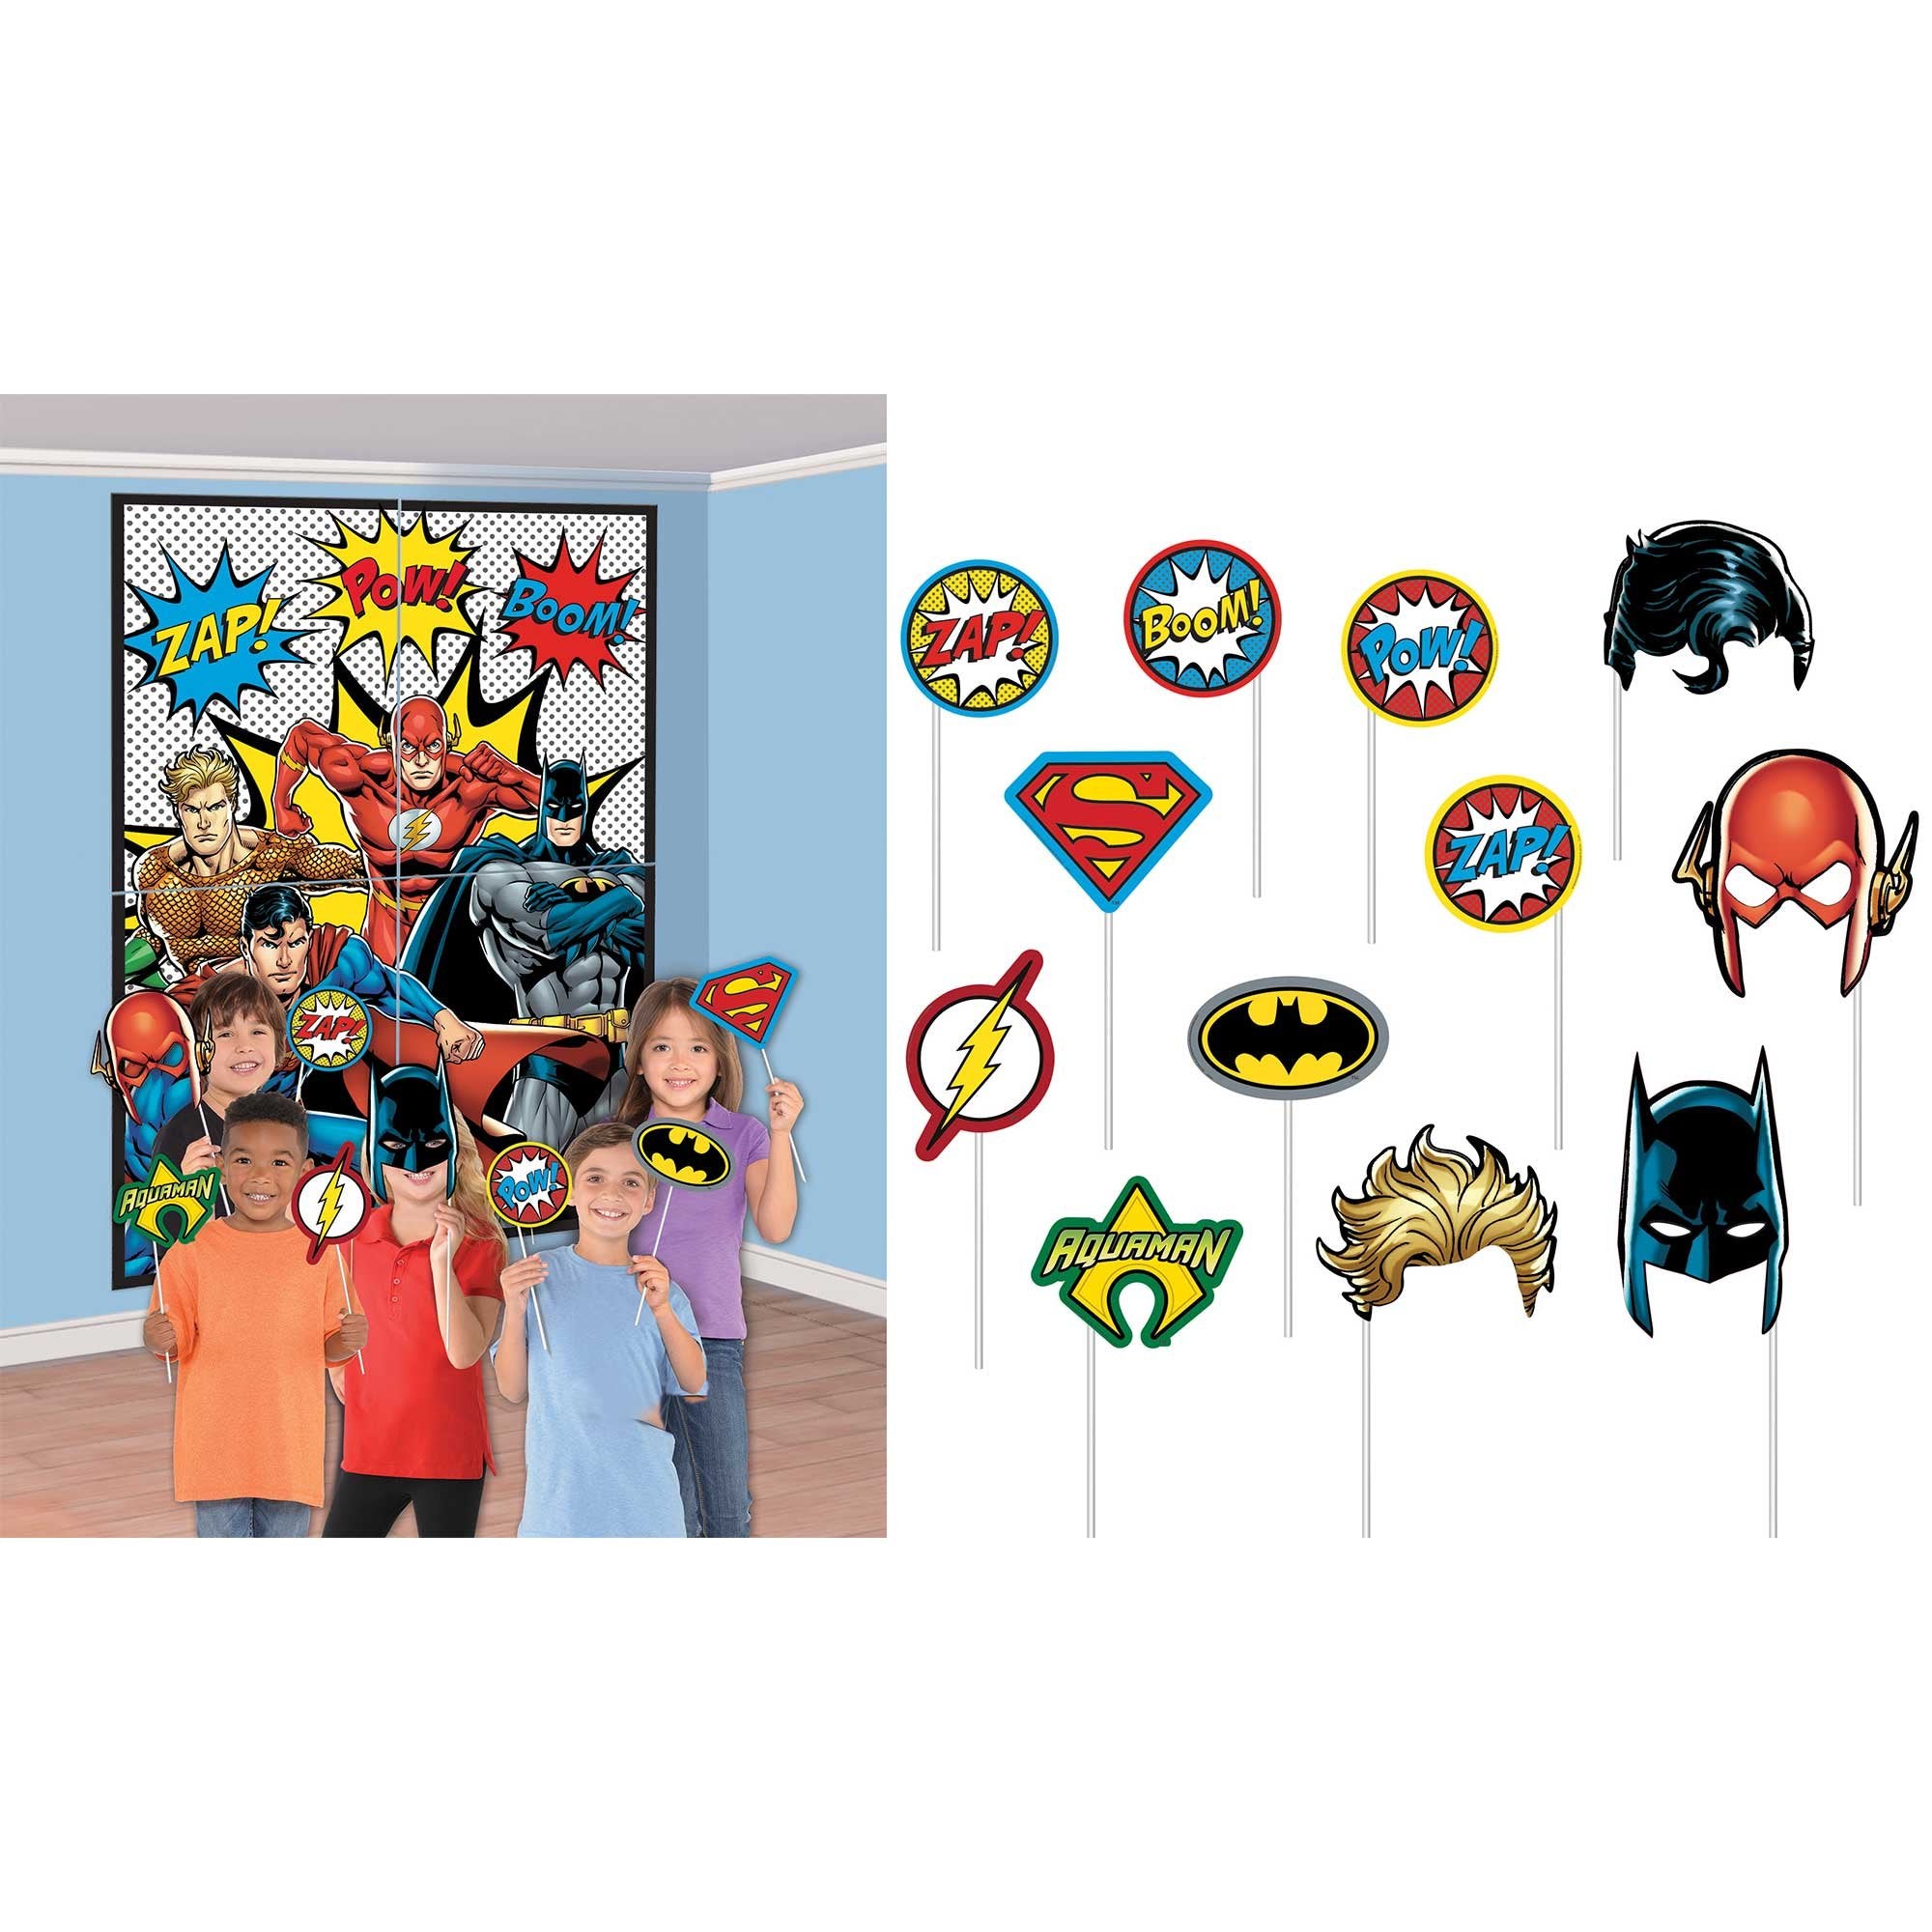 Party Empress' Justice League Collection transforms any event into a superhero spectacle, featuring vibrant decorations inspired by DC Comics' iconic team